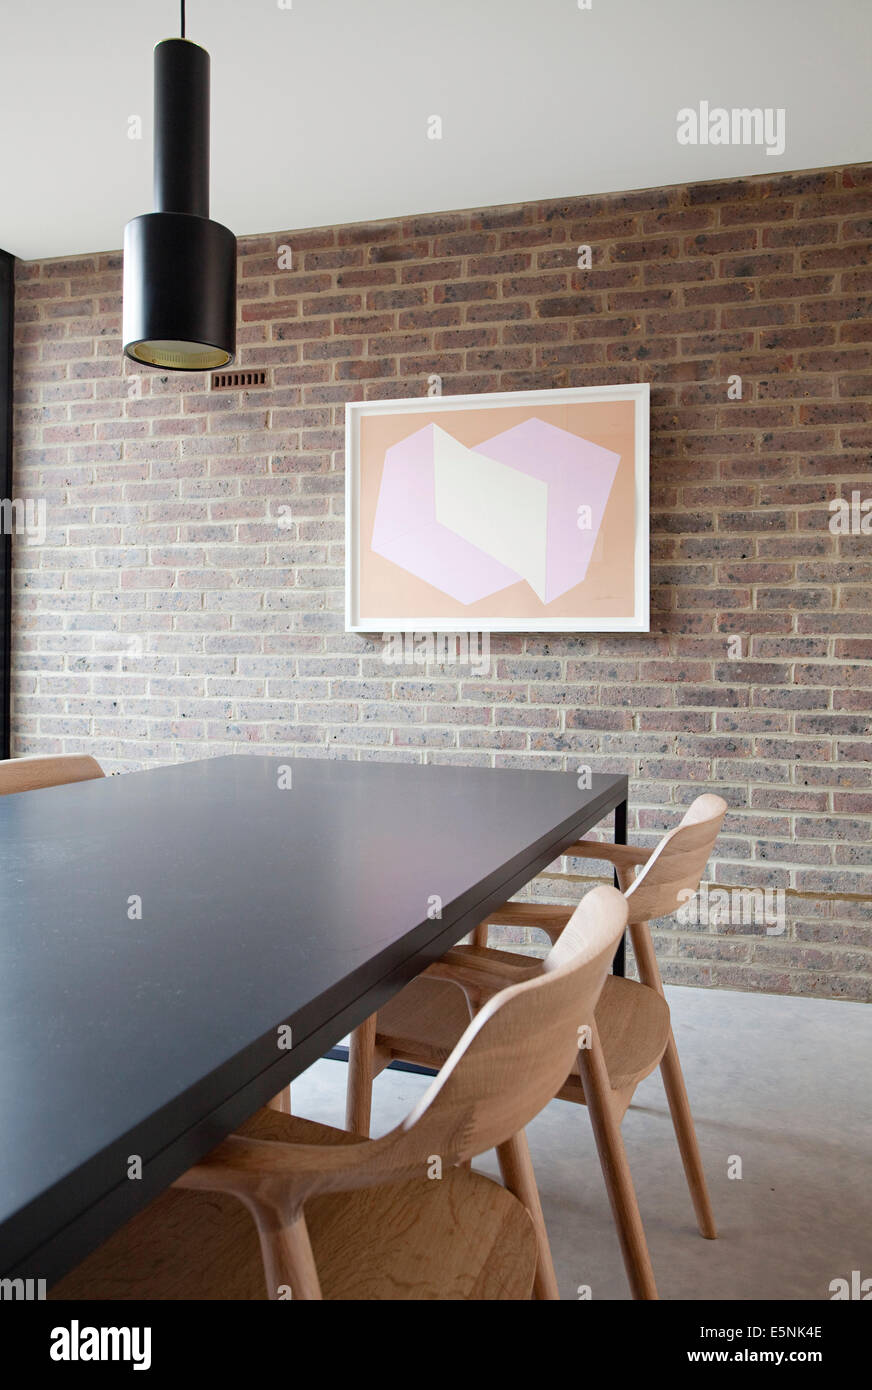 Dining table with modern artwork on exposed brick wall in Duggan Morris house, Kings Grove, Peckham, London, UK. Stock Photo